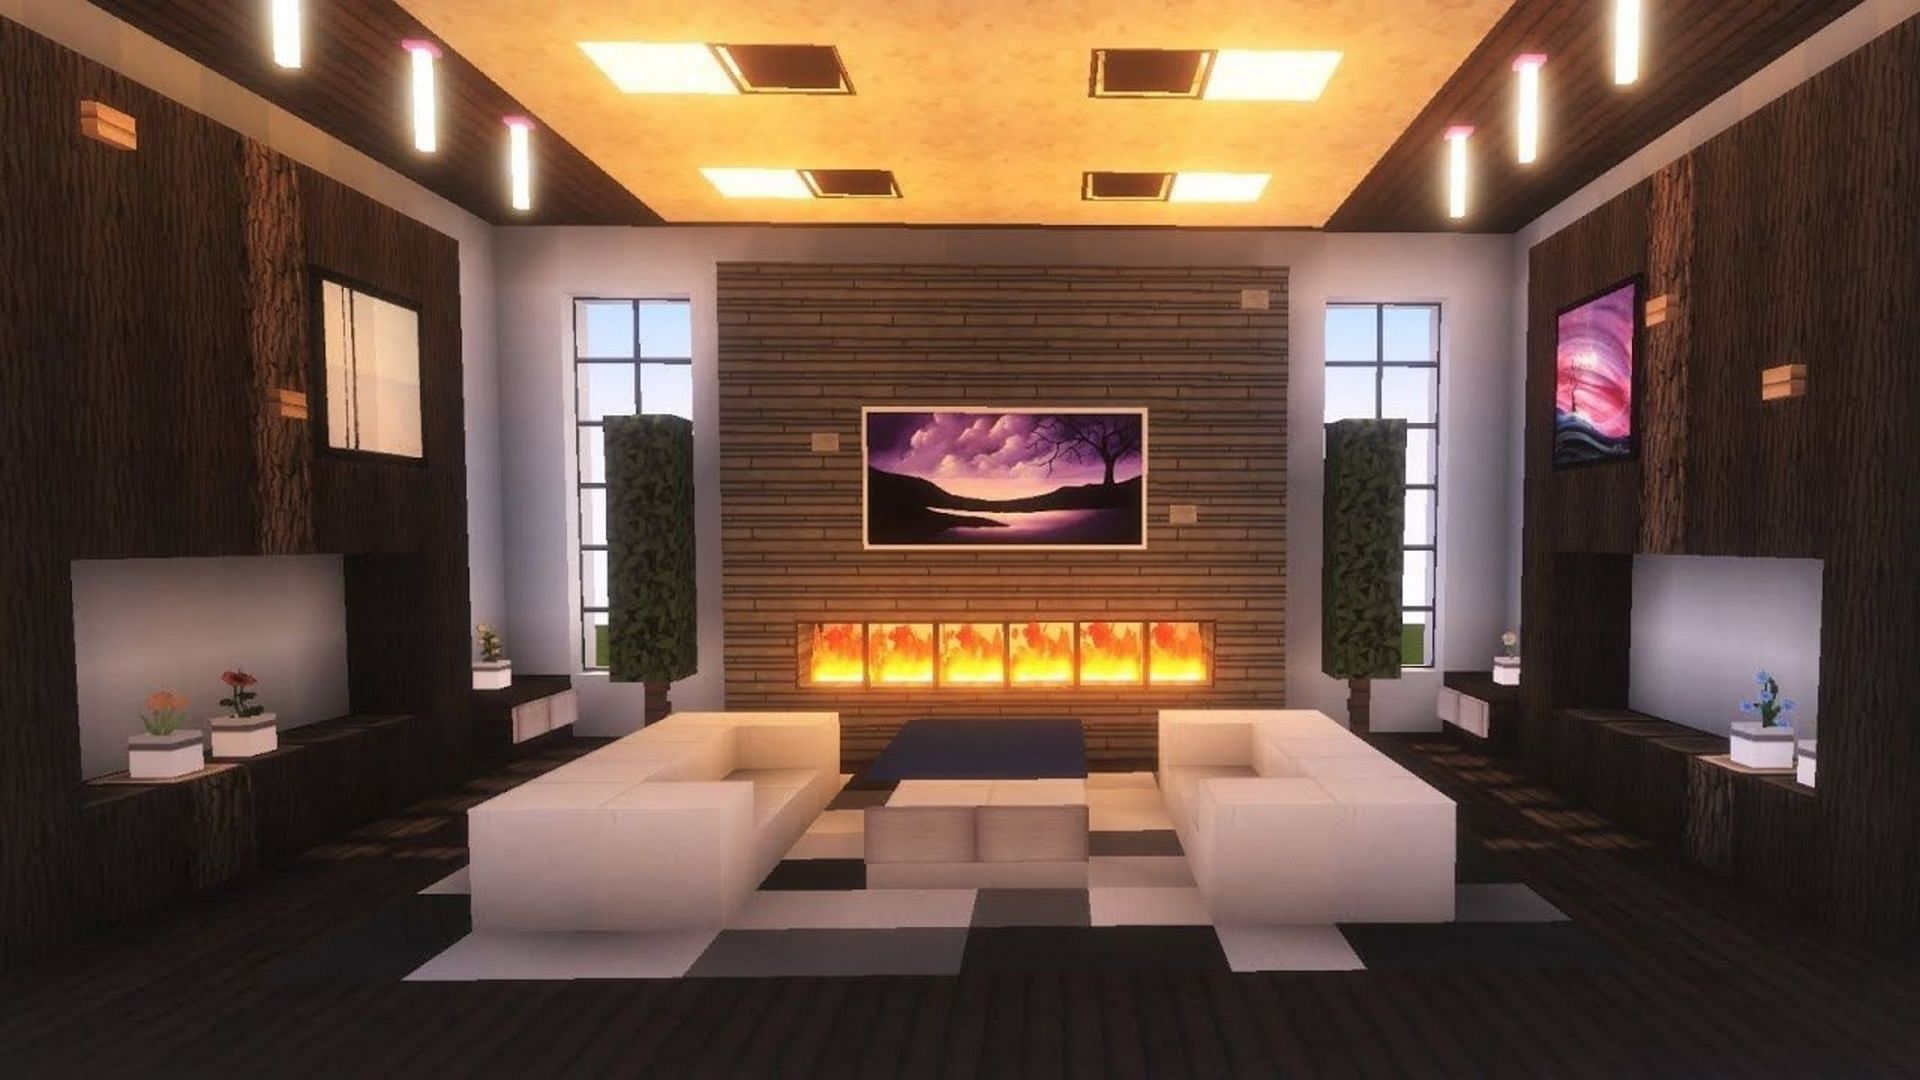 A lavish modern interior complete with couches and fireplace (Image via Mojang)